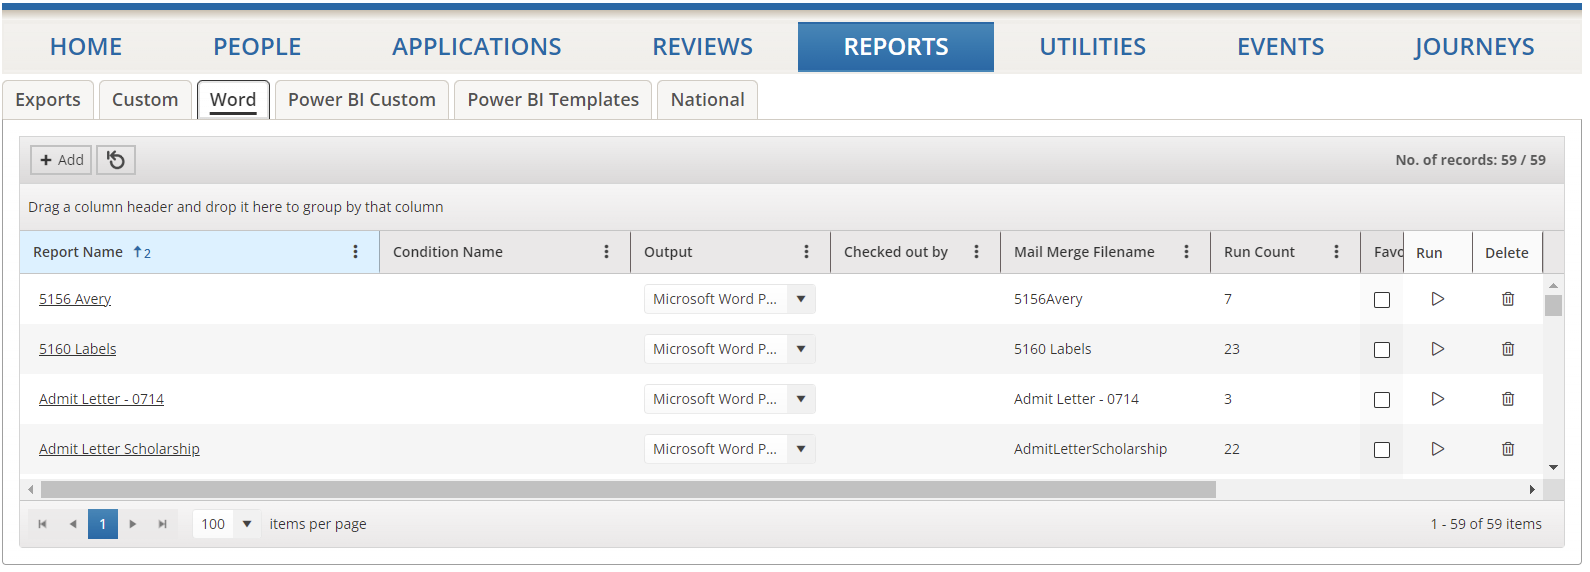 Image shows the REPORTS area with the Word tab selected and various Word reports displayed on the grid available for selection to update, run, or delete. 